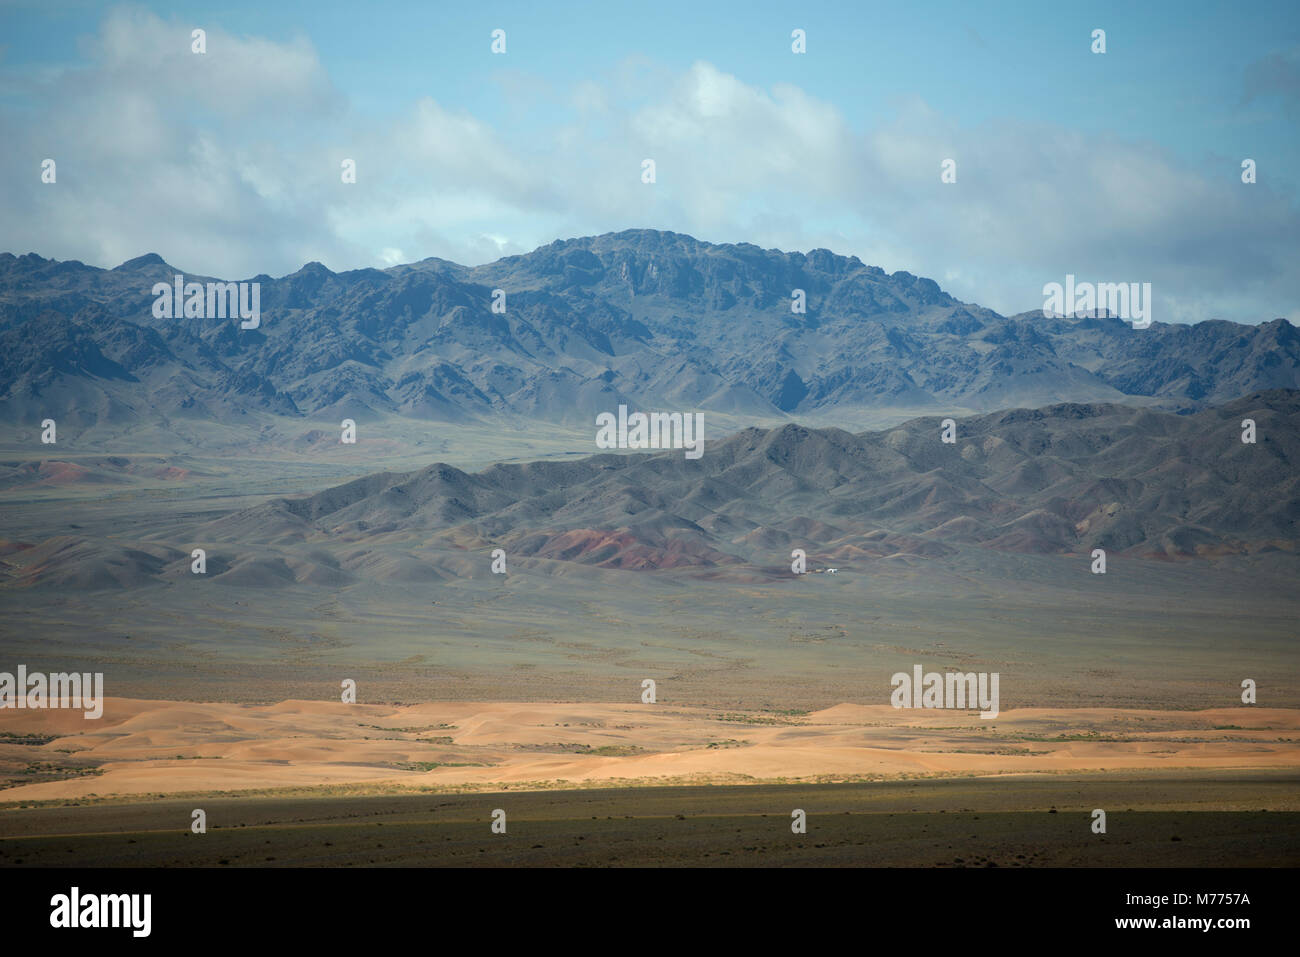 Difficult to spot at first, this tiny settlement shows the isolation of a nomadic community in the mountains of Mongolia's Gobi Destert. Stock Photo